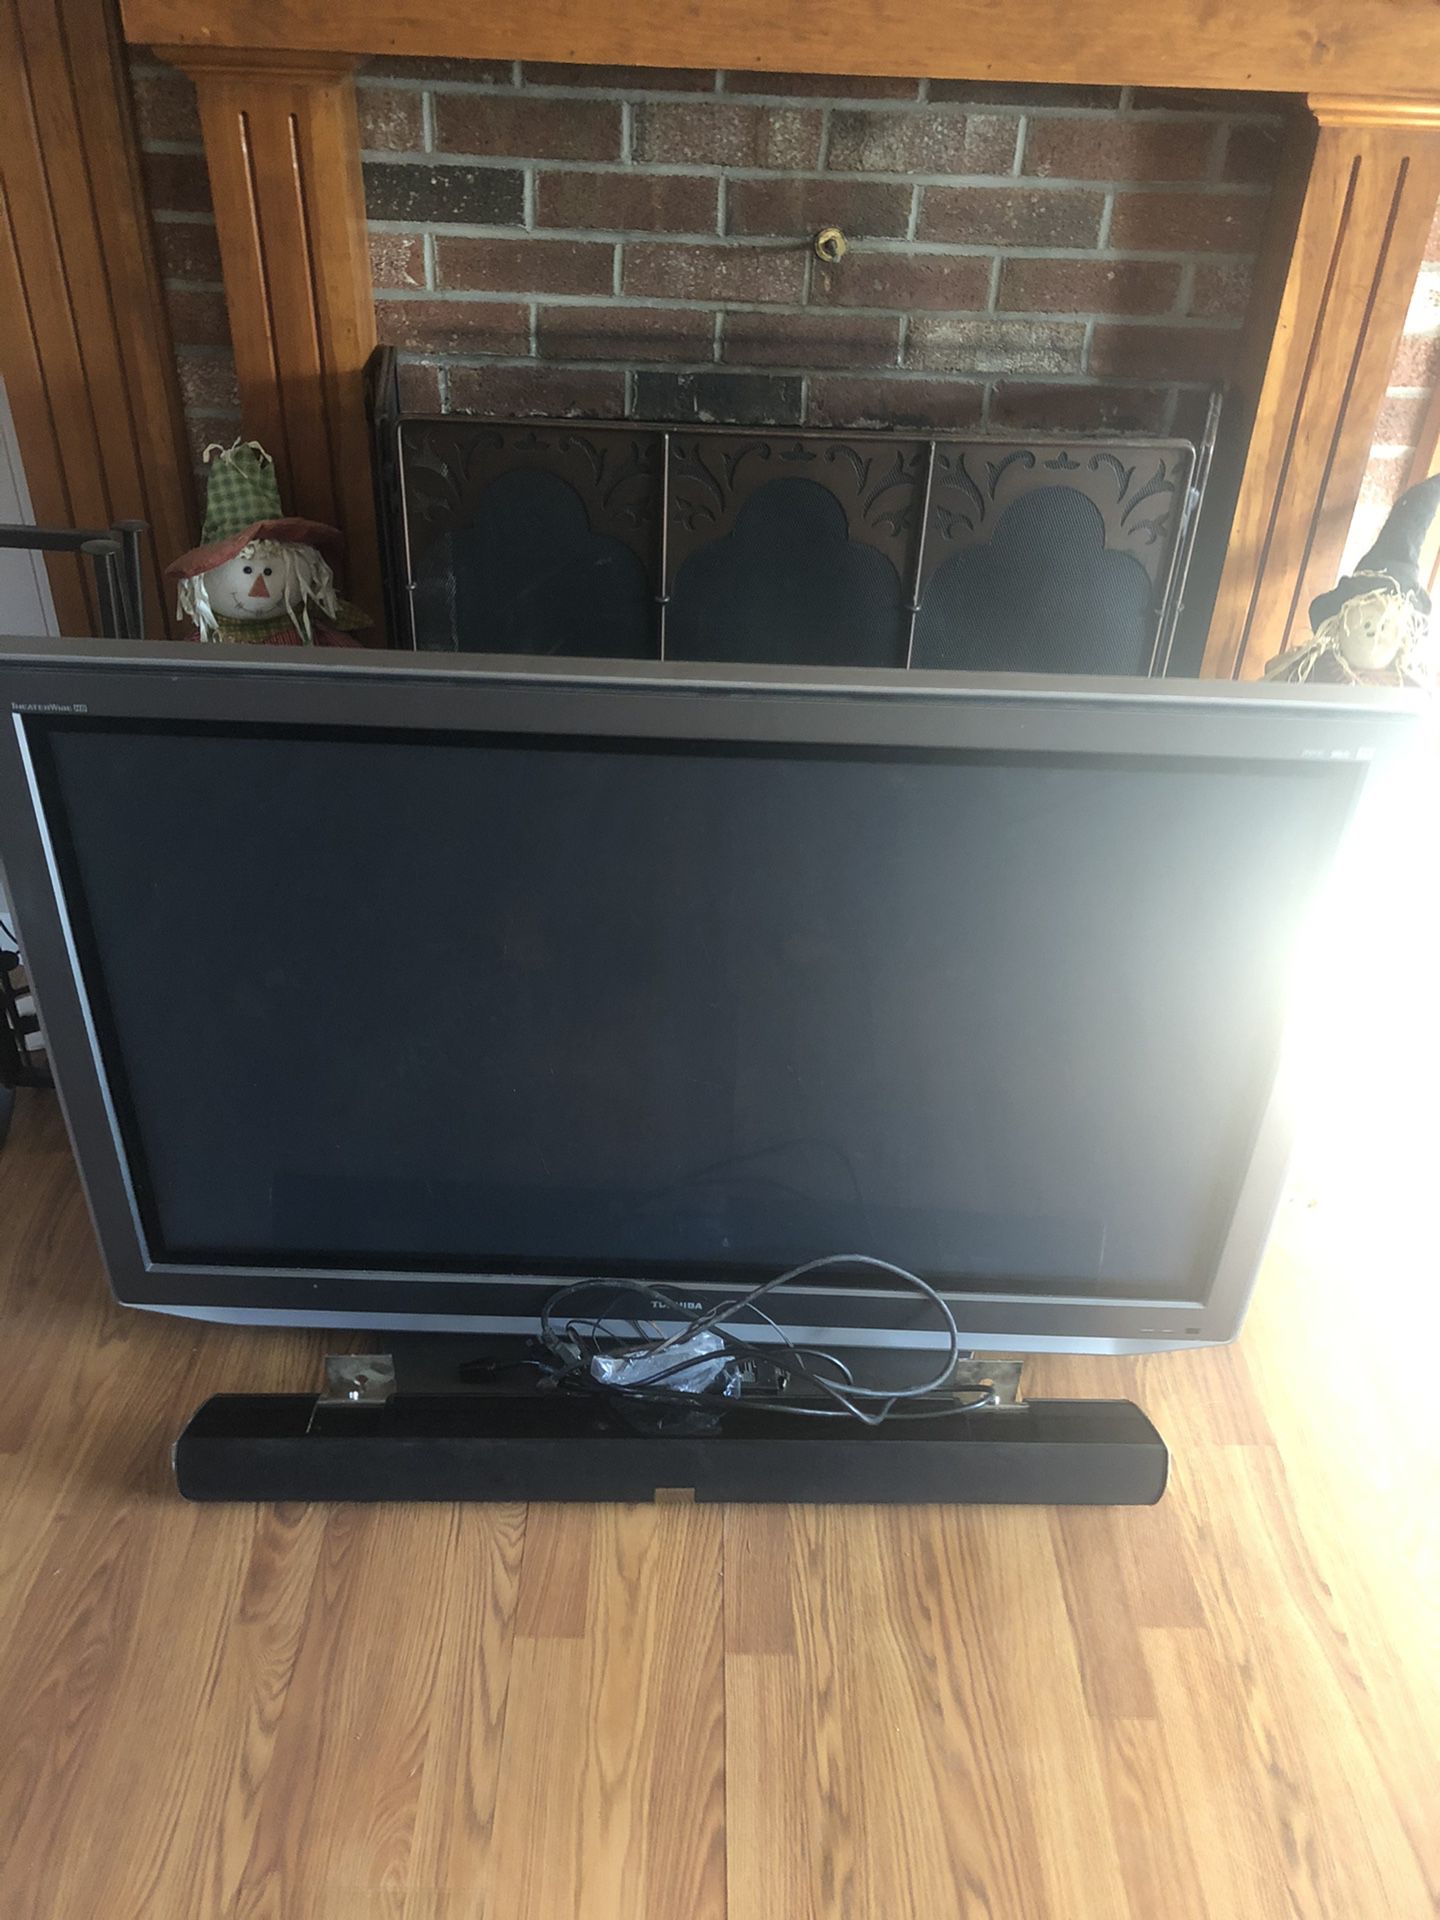 55 inch tv with sound bar and wii